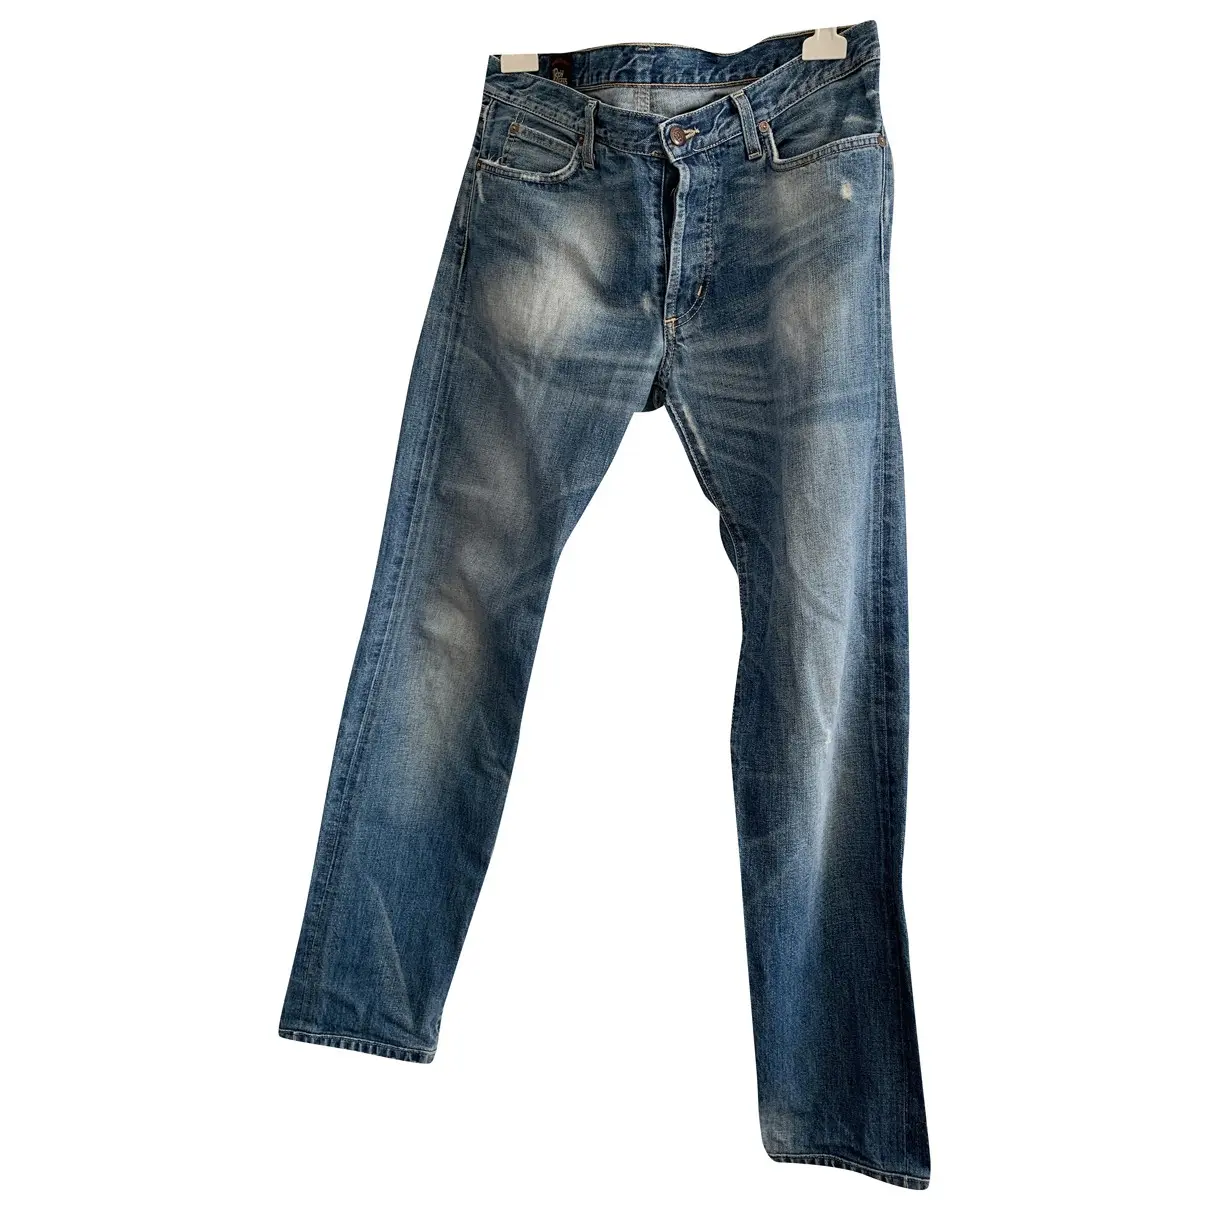 Straight jeans Roy Roger's - Vintage